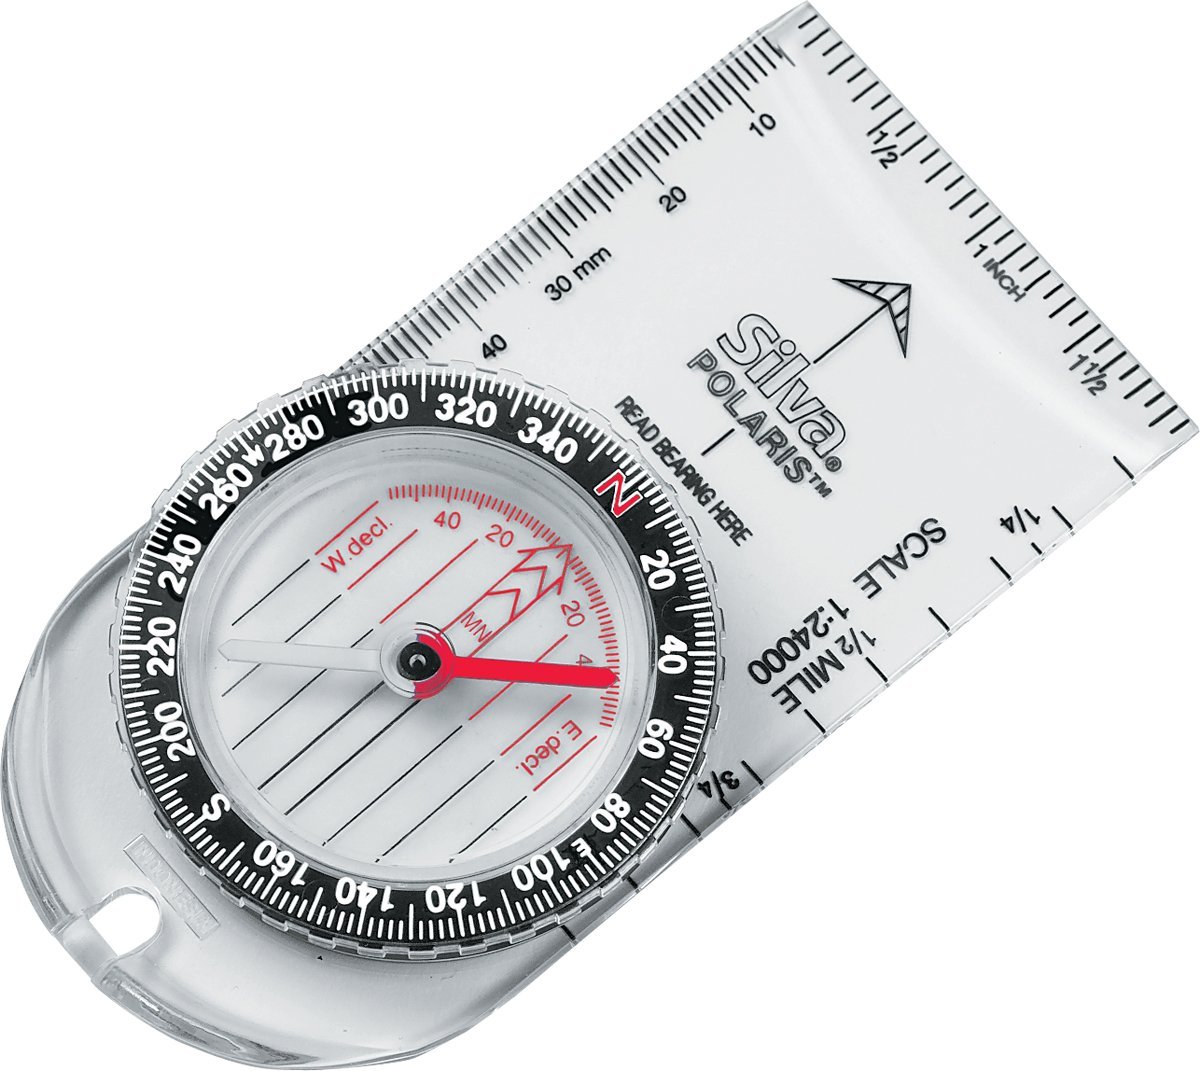 Elisona-Mini Pocket Multi-functional Compass Map Millimeter Inch Measure Ruler Compass with Nylon Strap